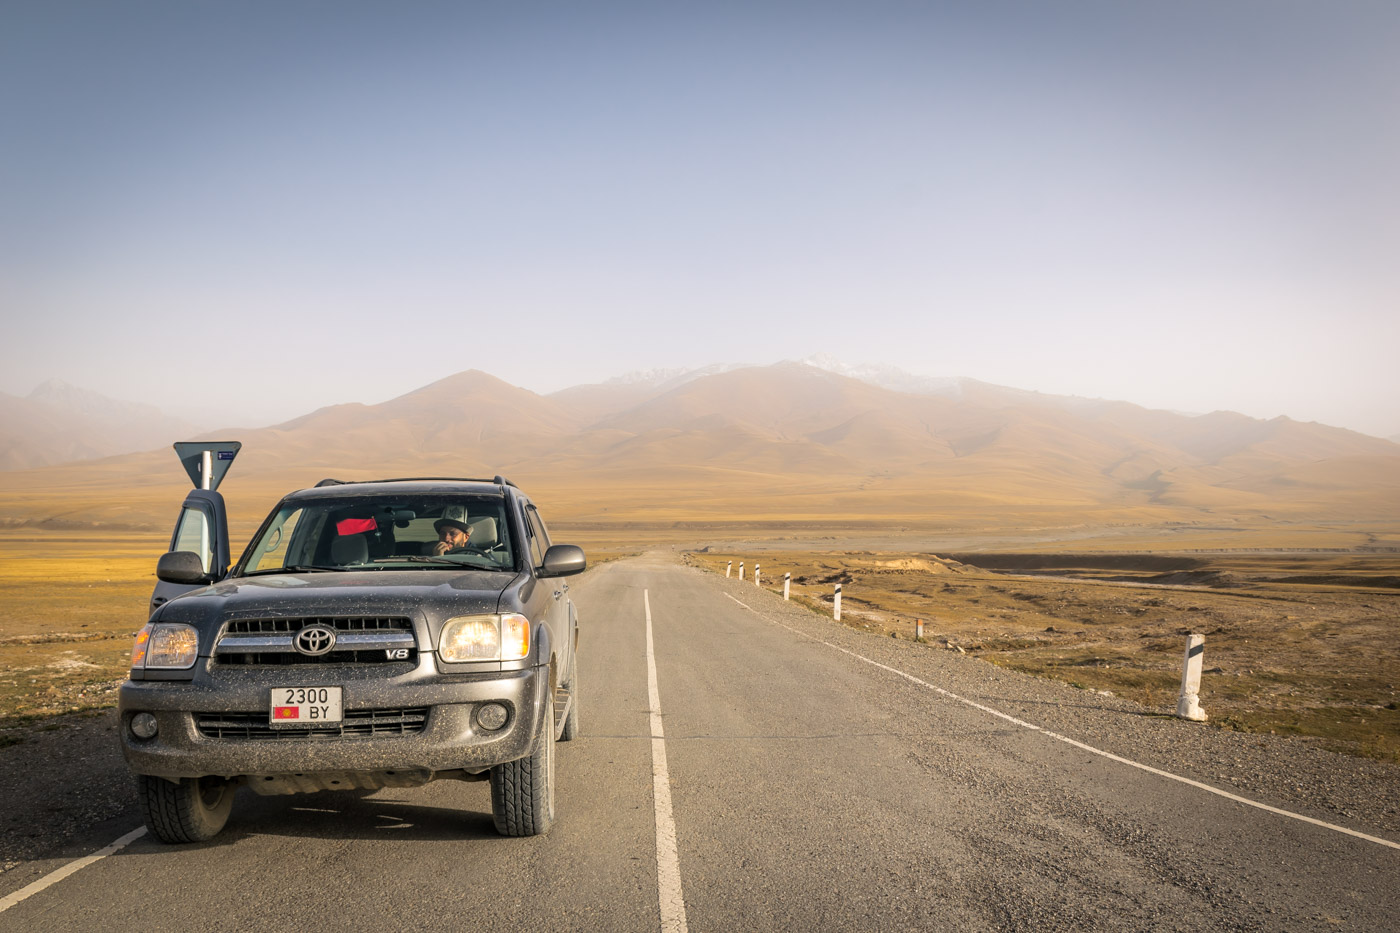 Our car stopped in the side of the road in Kyrgyzstan with a range of mountains in the background